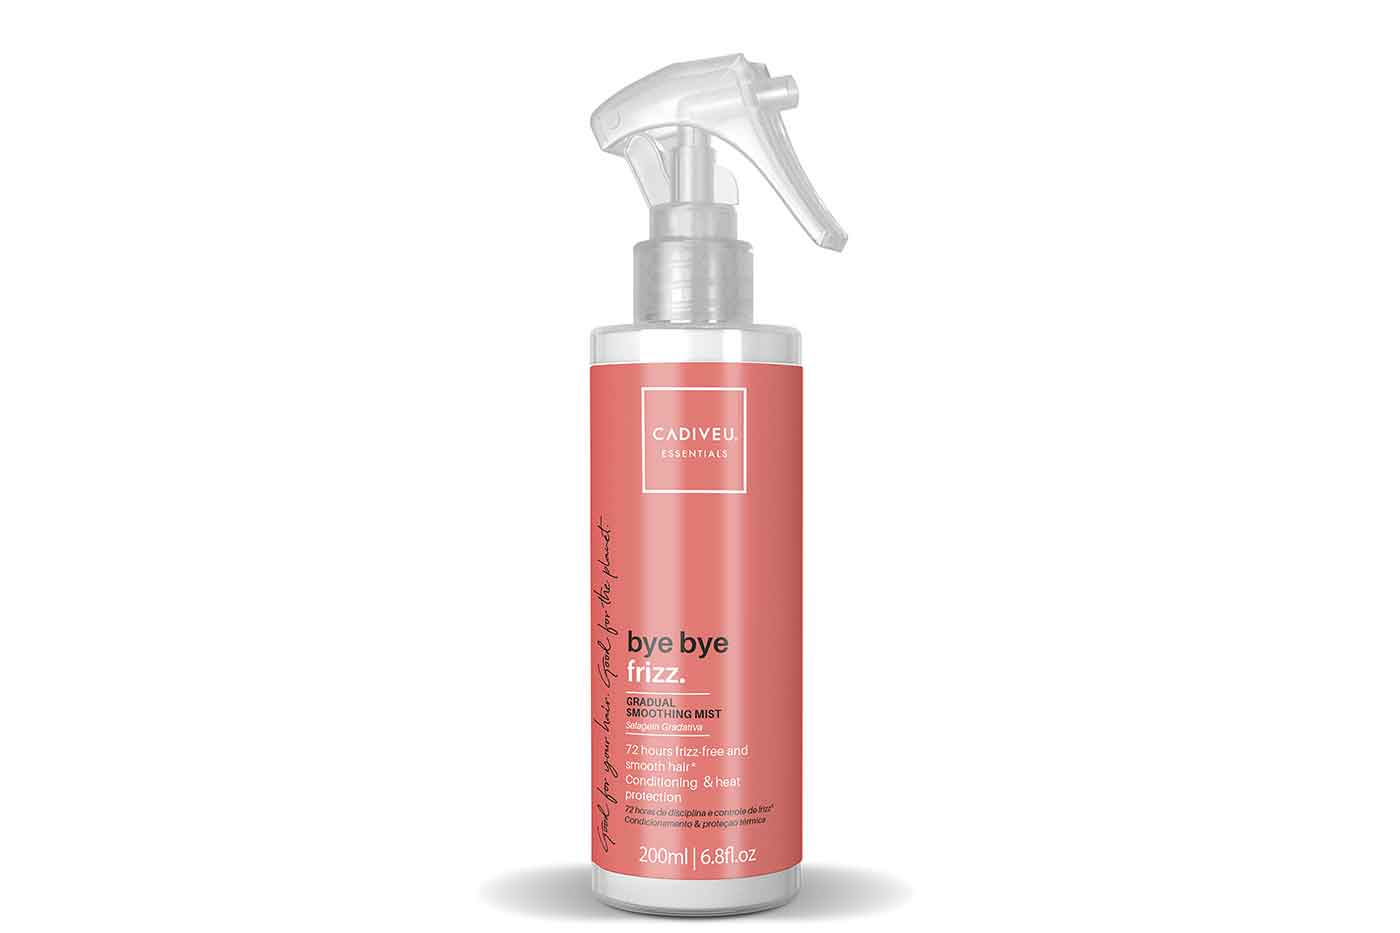 Cadiveu’s Bye Bye frizz gradual smoothing for your client’s frizzy hair